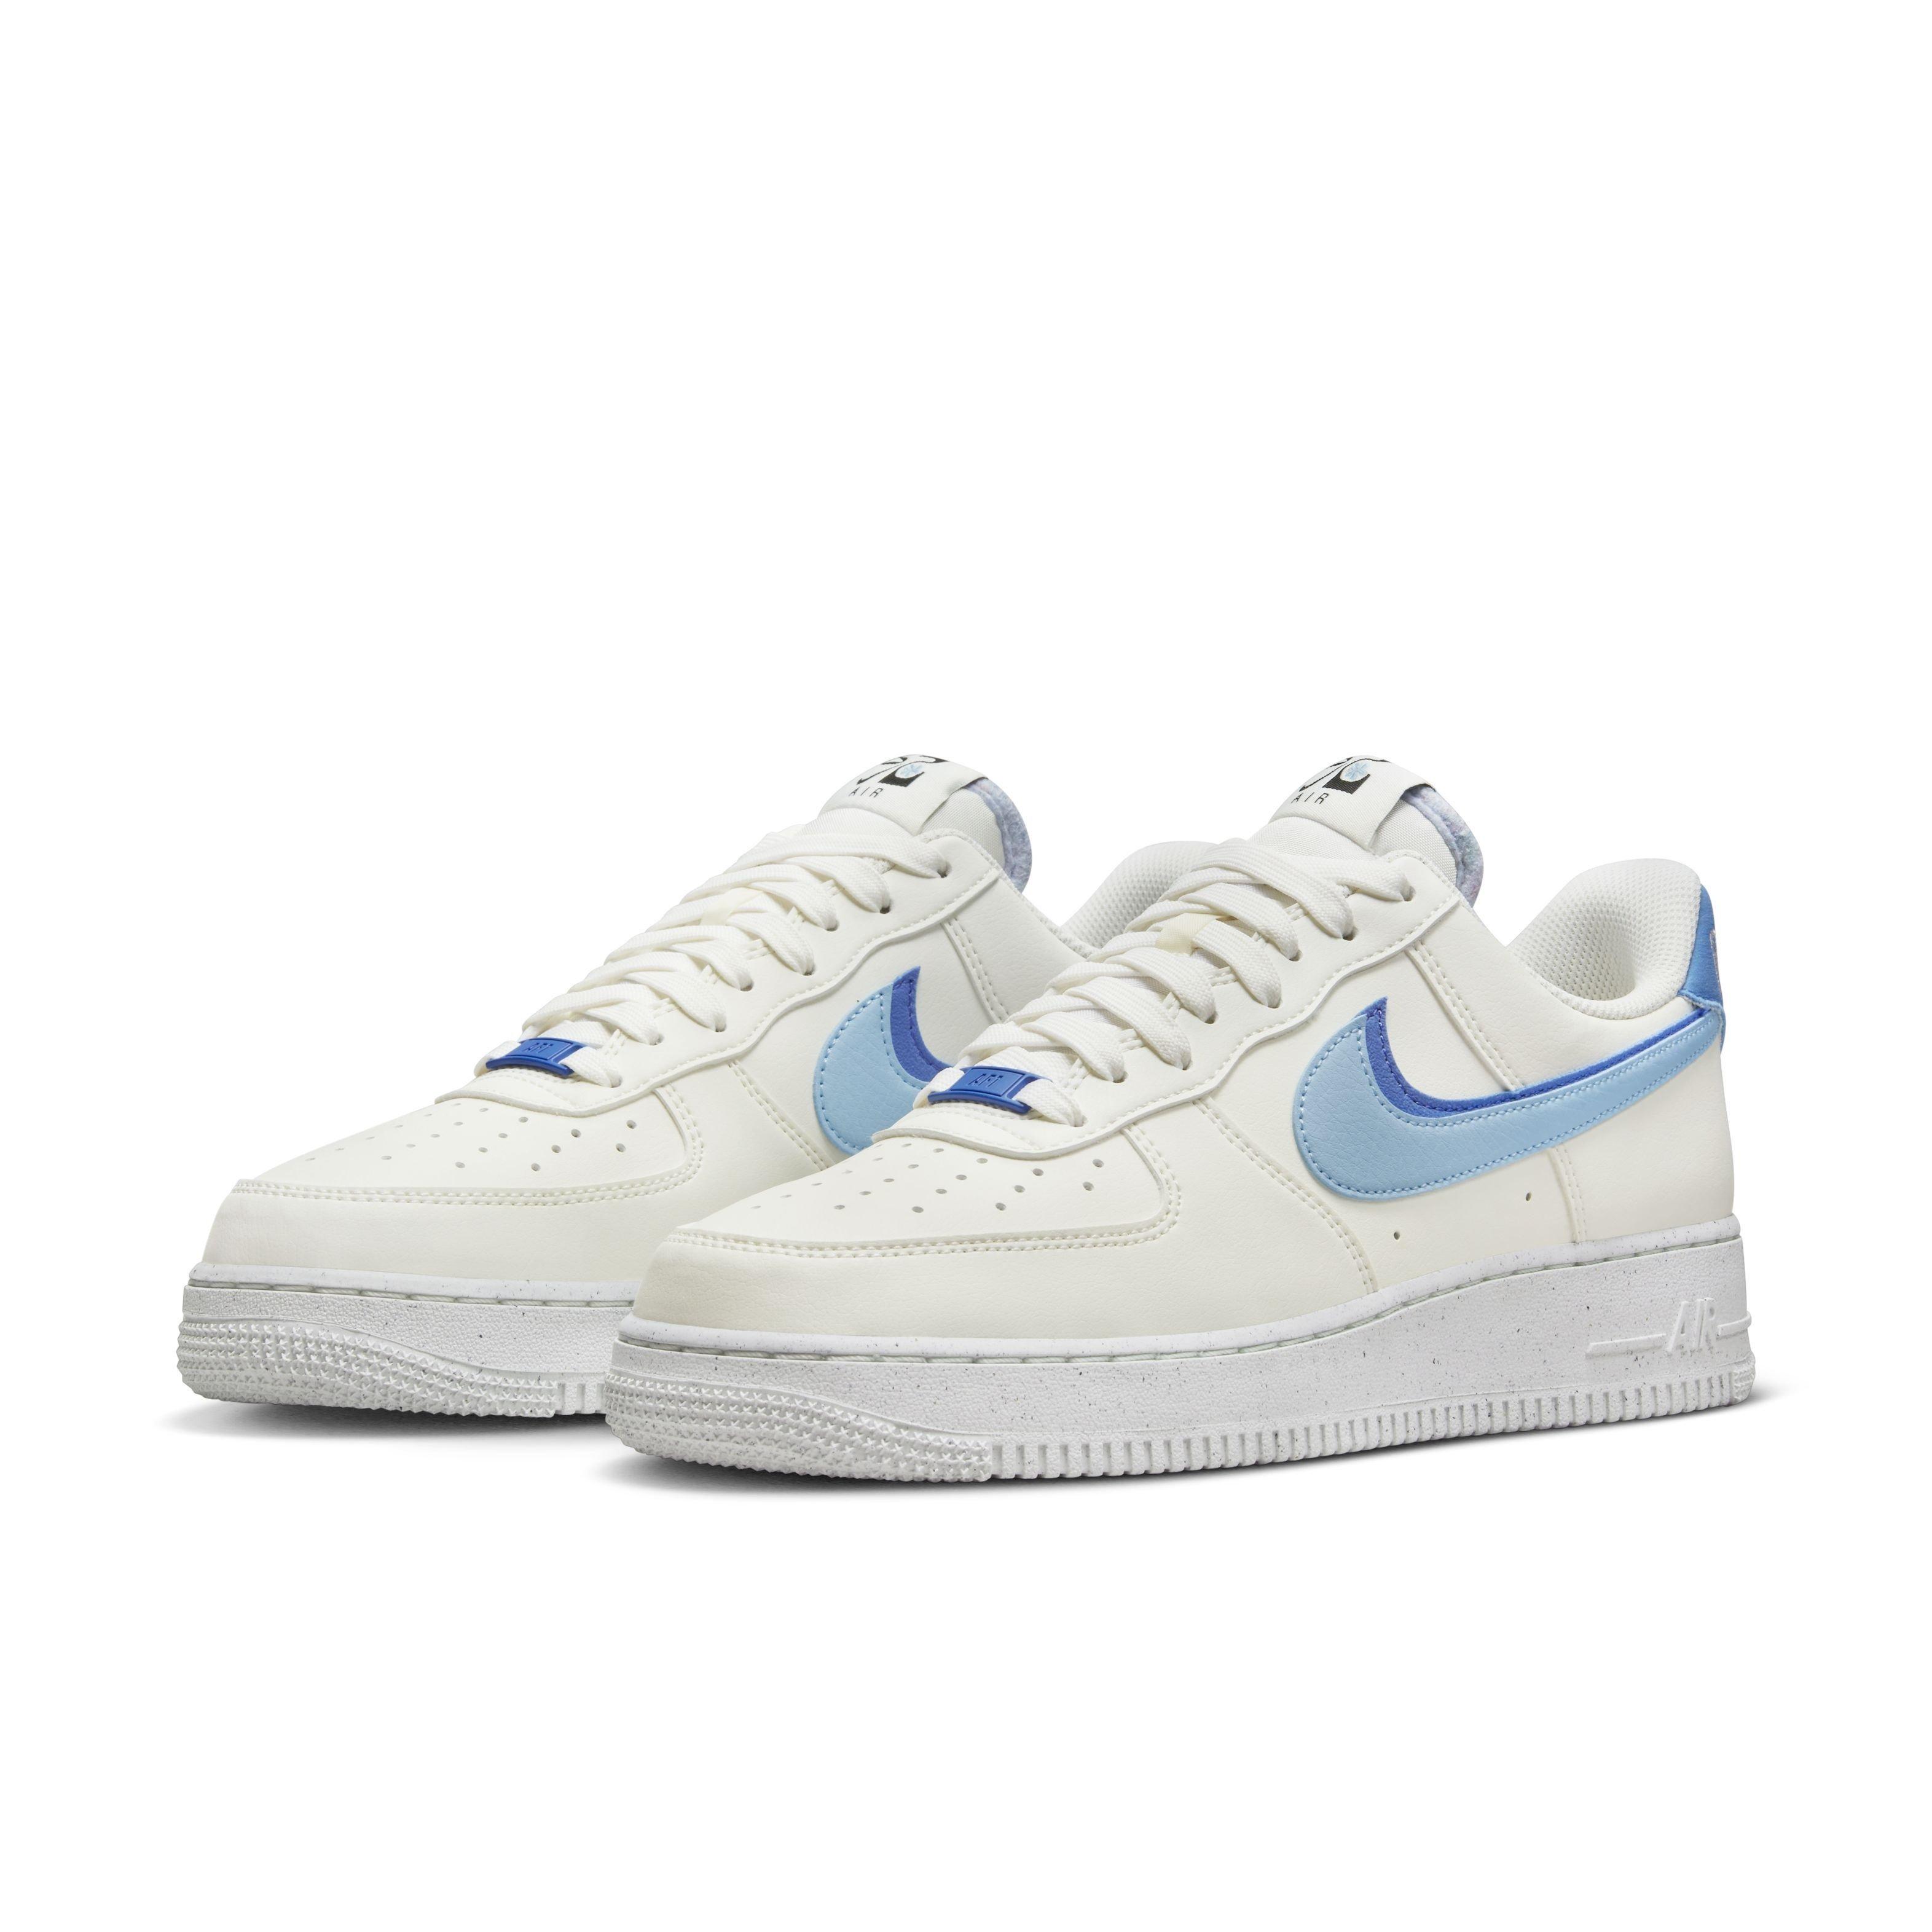 Nike Air Force 1 LV8 'Sail Medium Blue' Double Swoosh Youth/Women Size 8,8.5